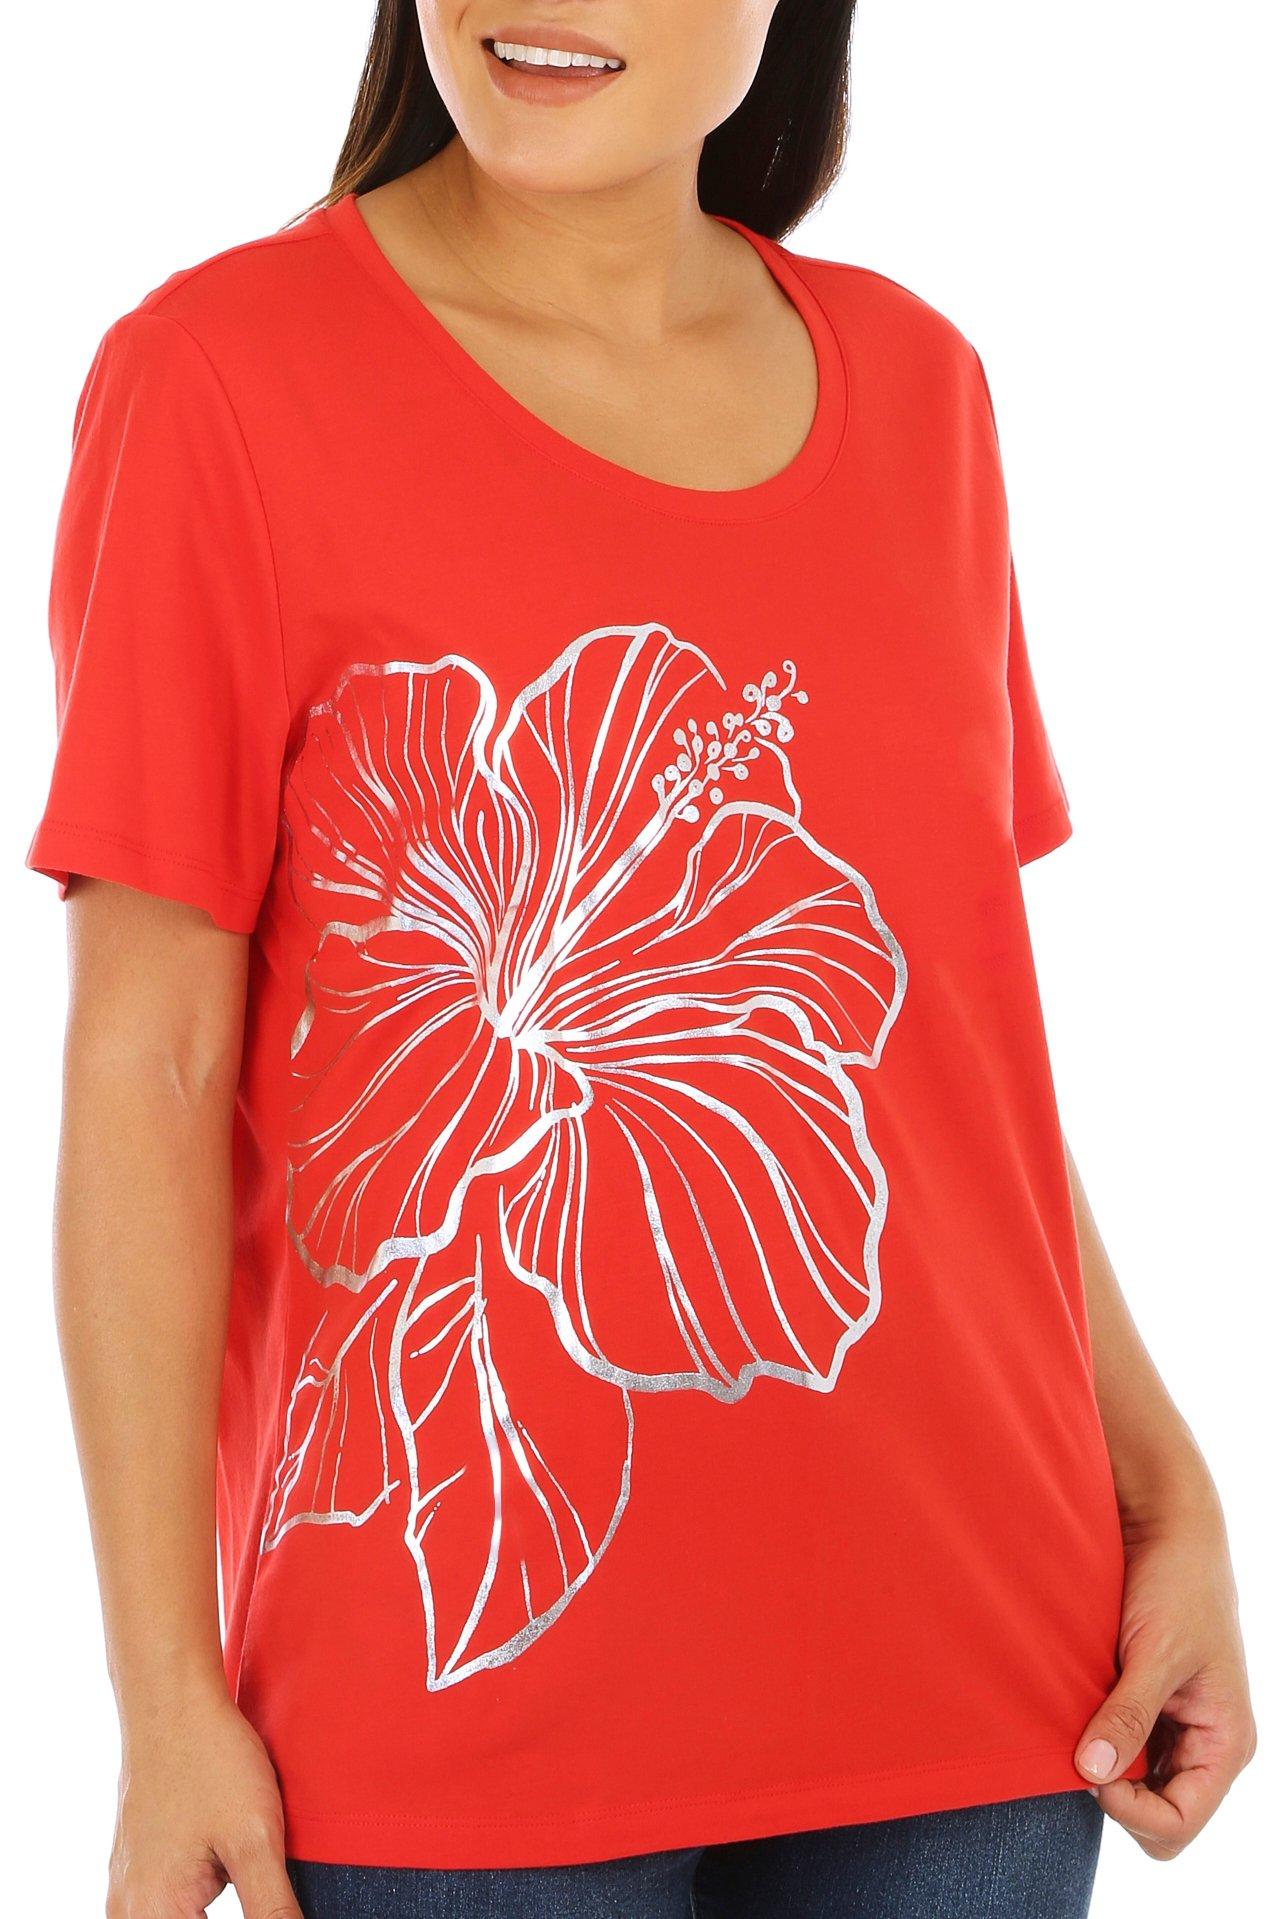 Womens Embellished Hibiscus Short Sleeve Top